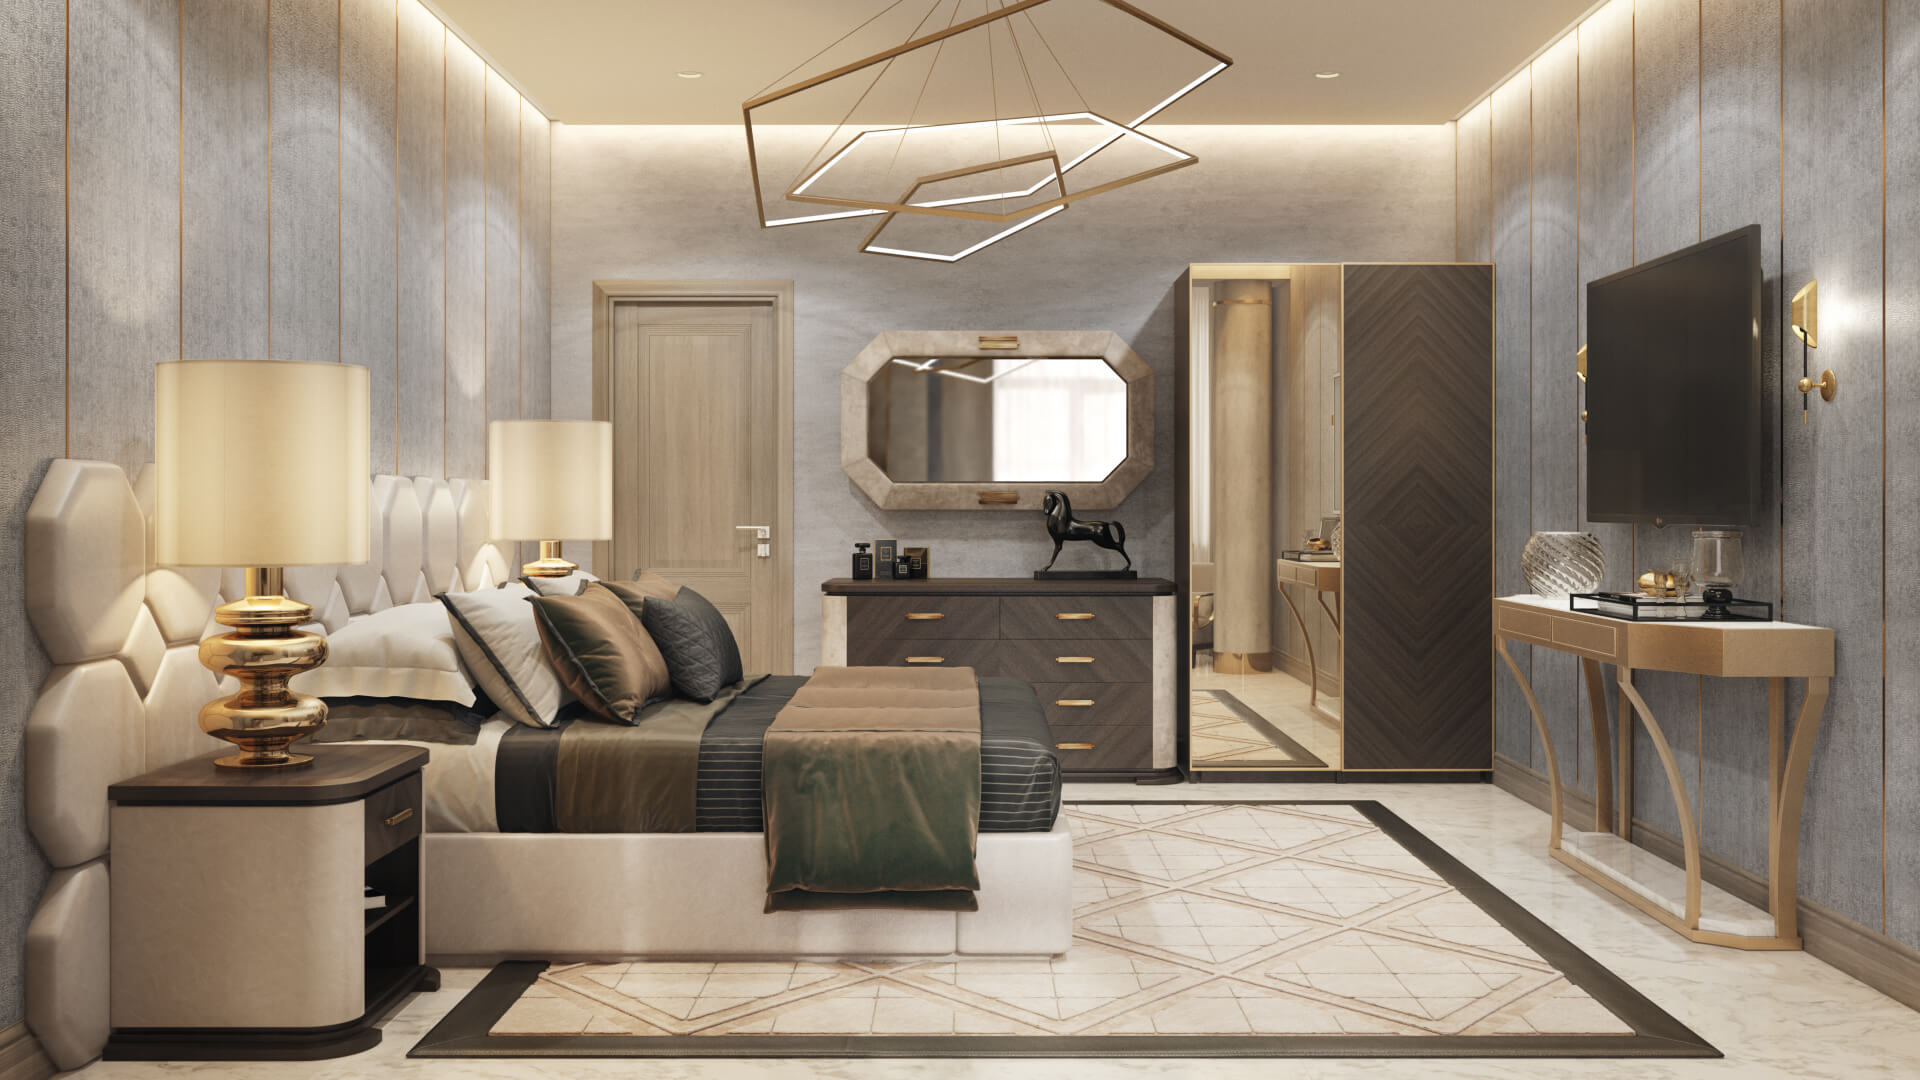 Photorealistic 3D Render of a Hotel Room